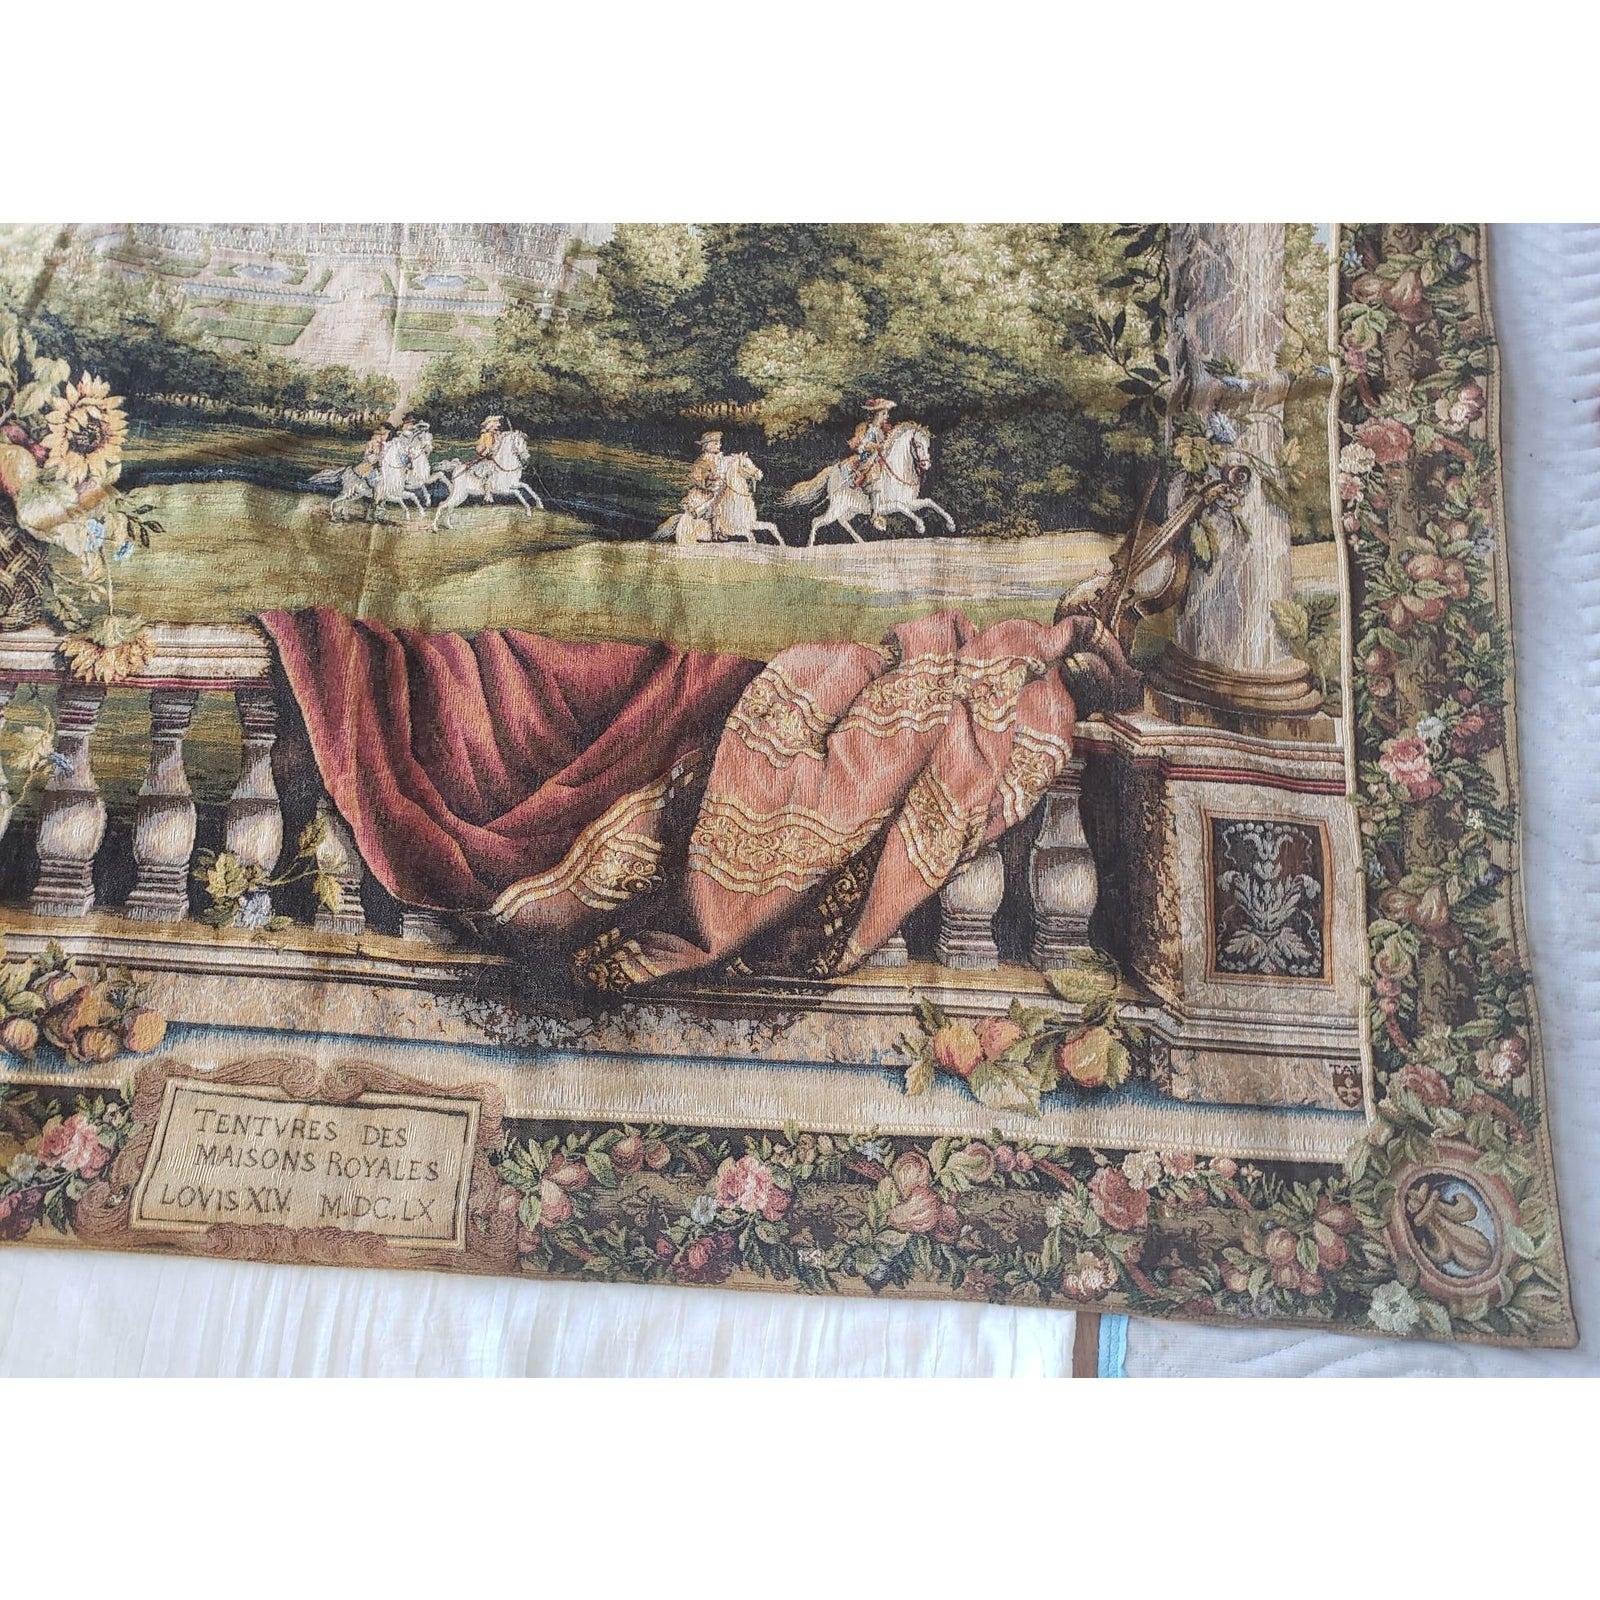 Tapestries LTD. Large hand woven Renaissance style wall hanging 55